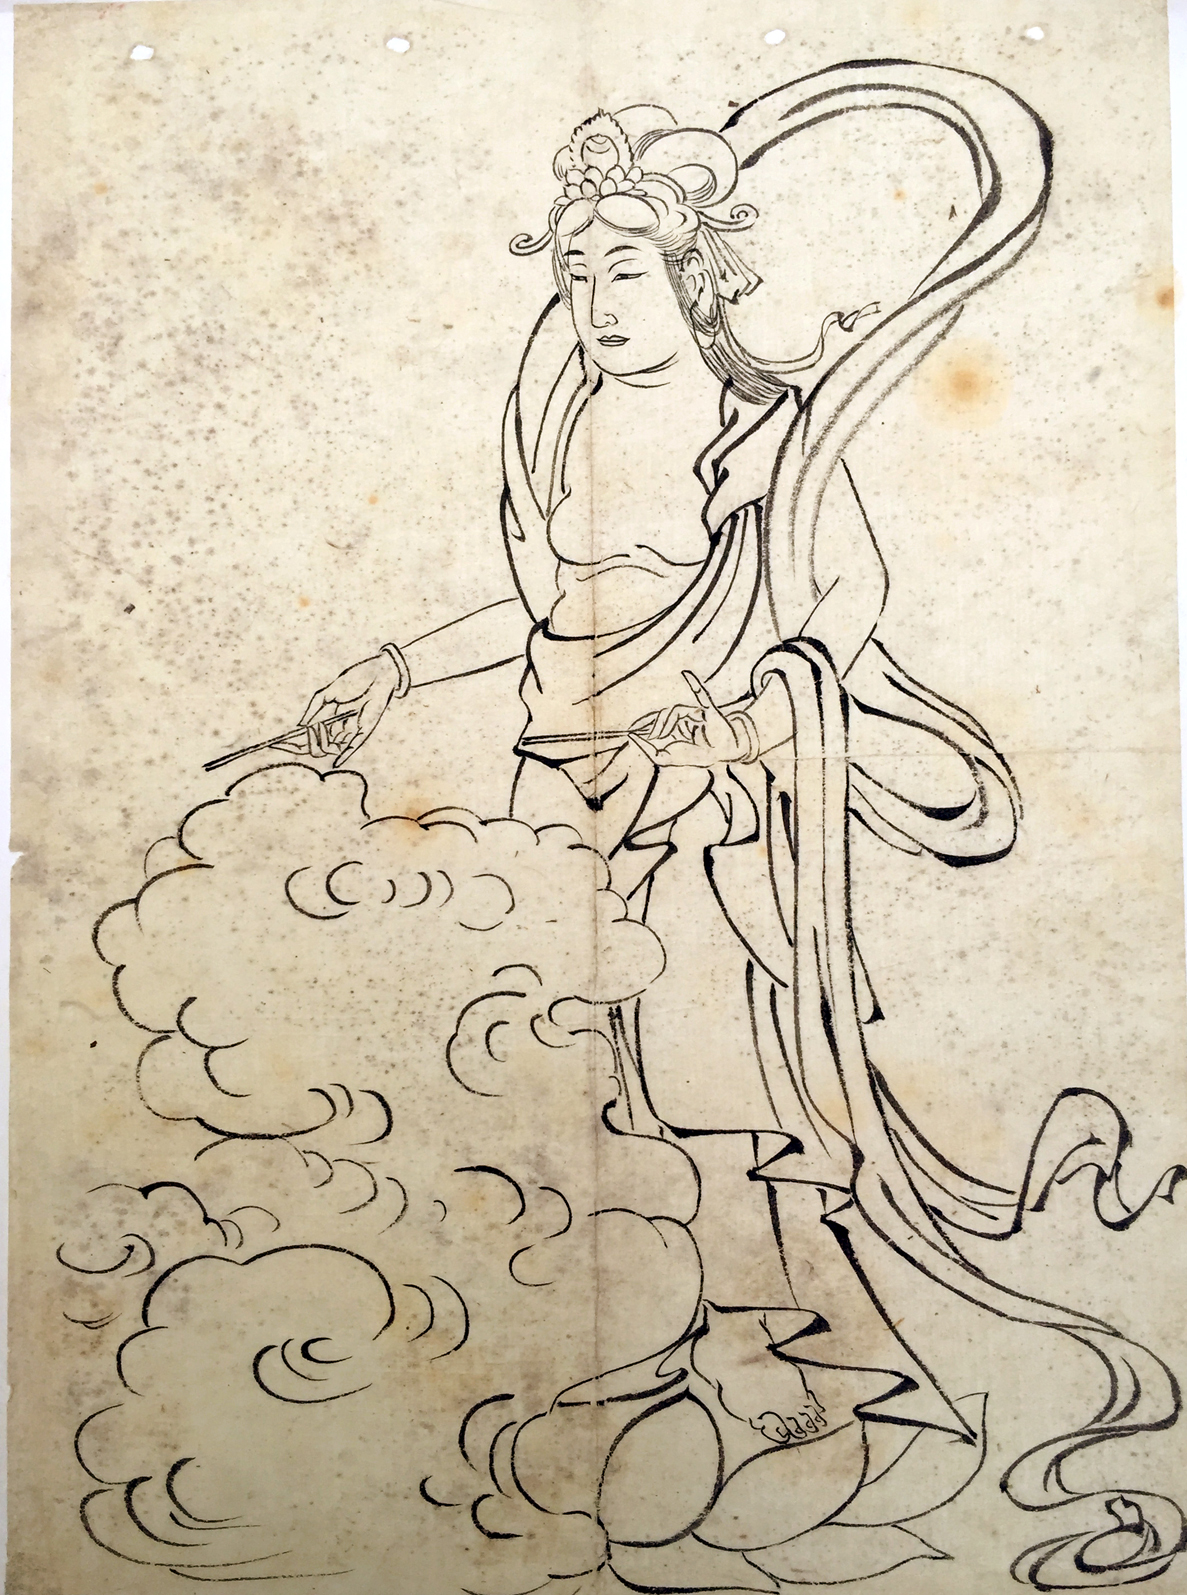 Hokusai - Goddess Kannon Casting a Spell - Hand Drawings